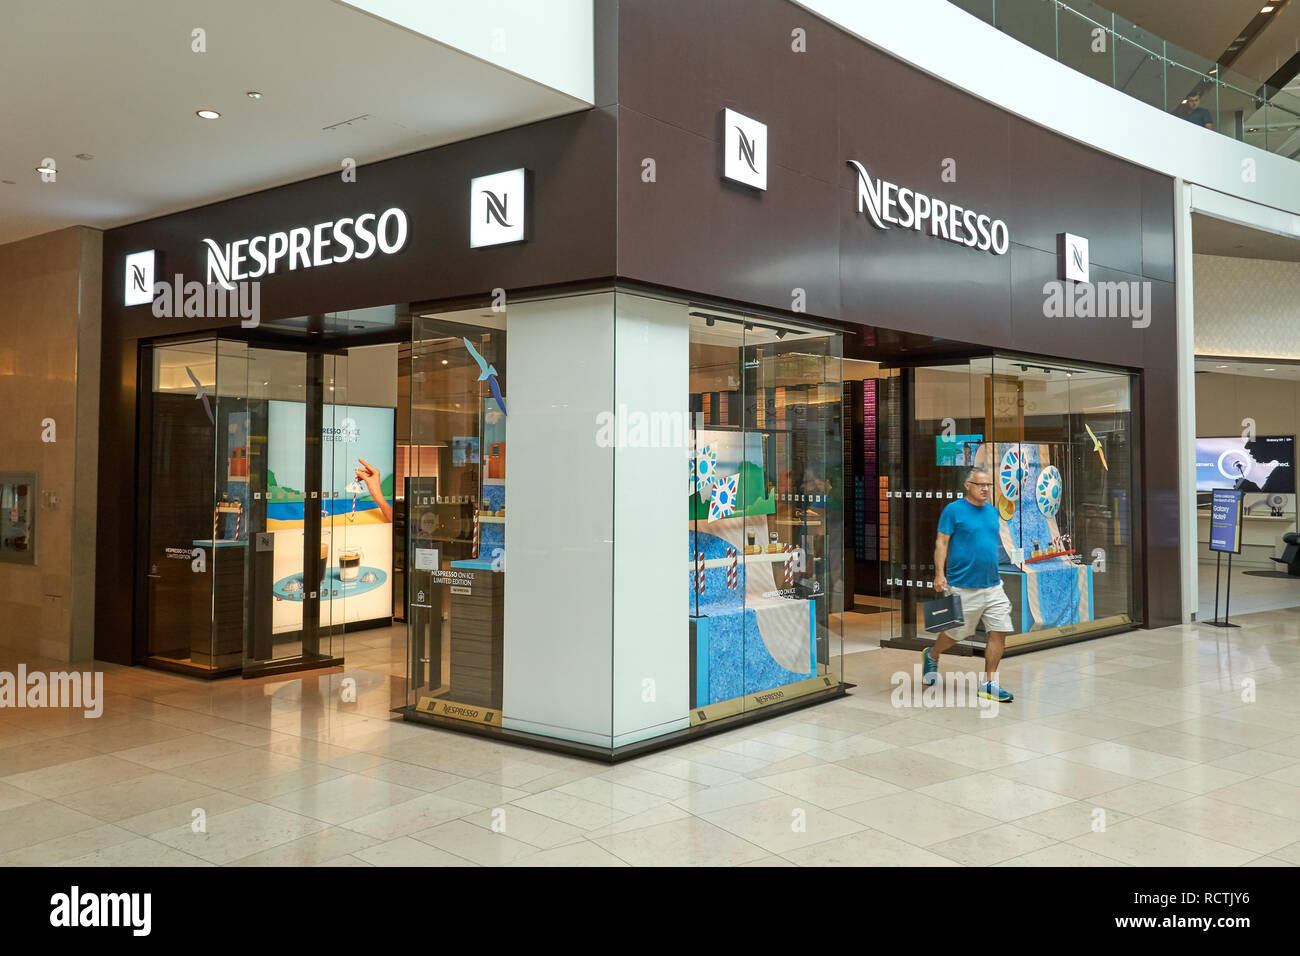 Nespresso Store Sign High Resolution Stock Photography and Images - Alamy